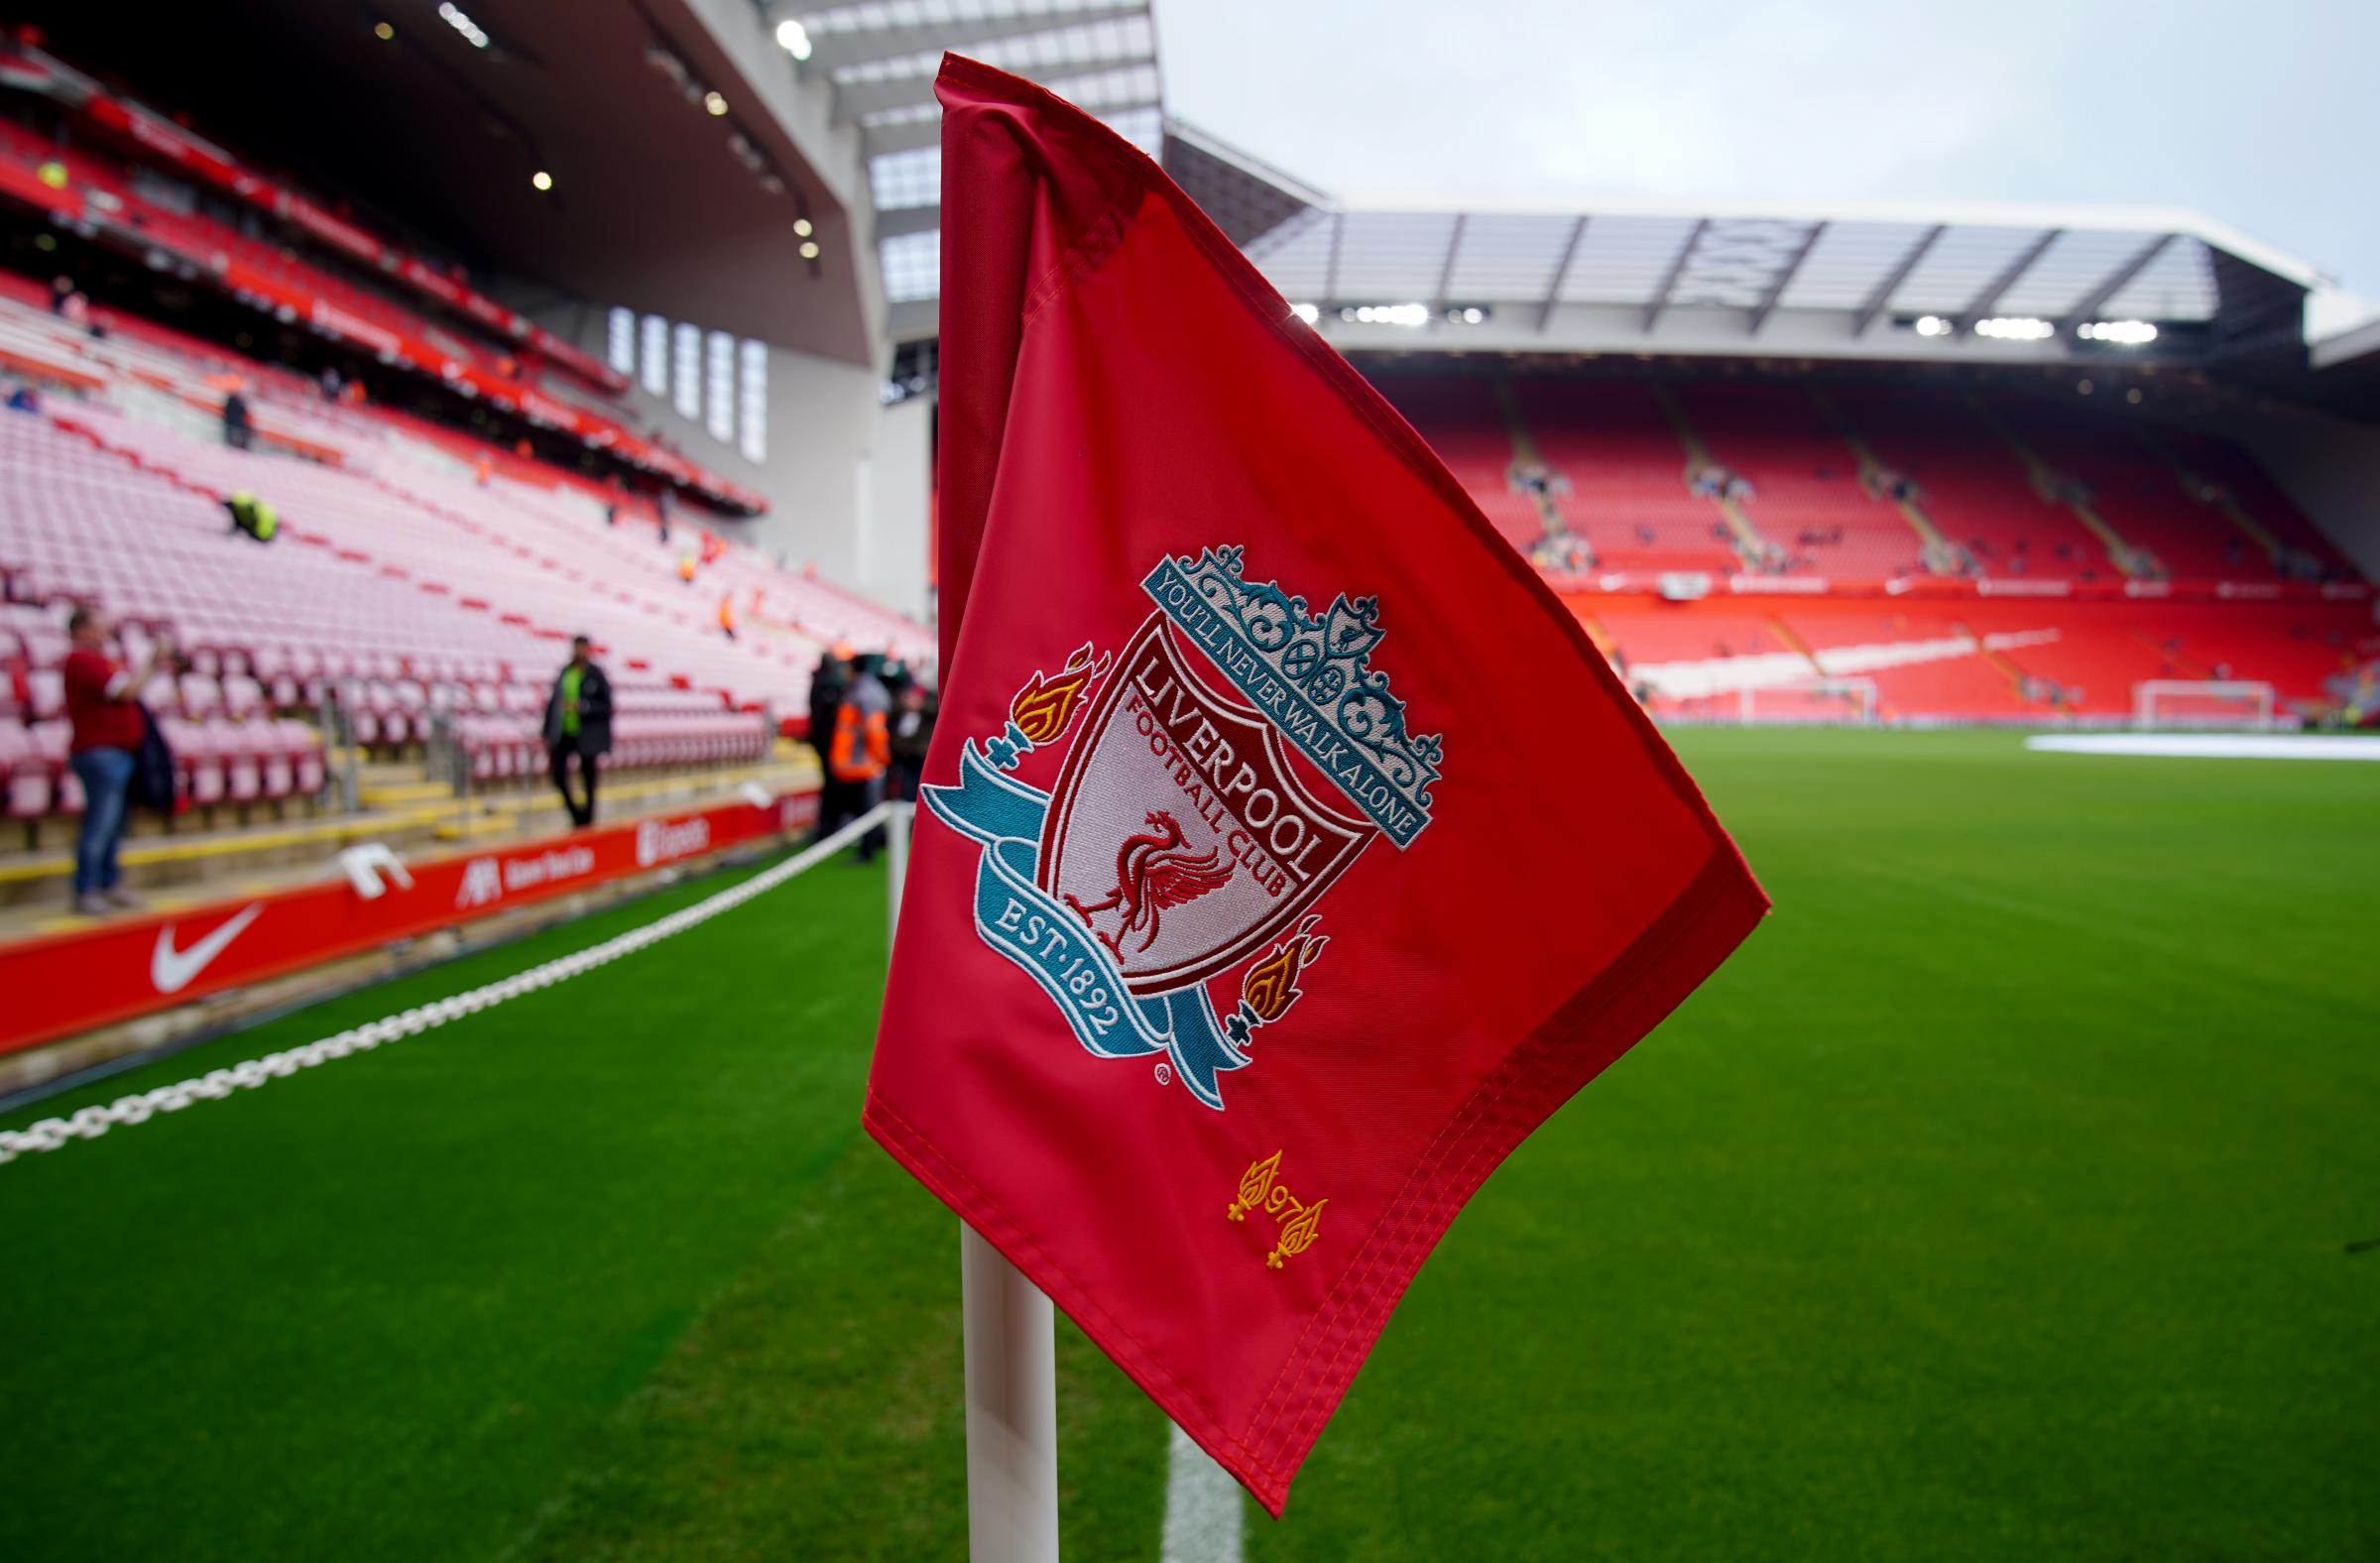 FA Cup: How to watch/stream or follow Liverpool vs Southampton FC